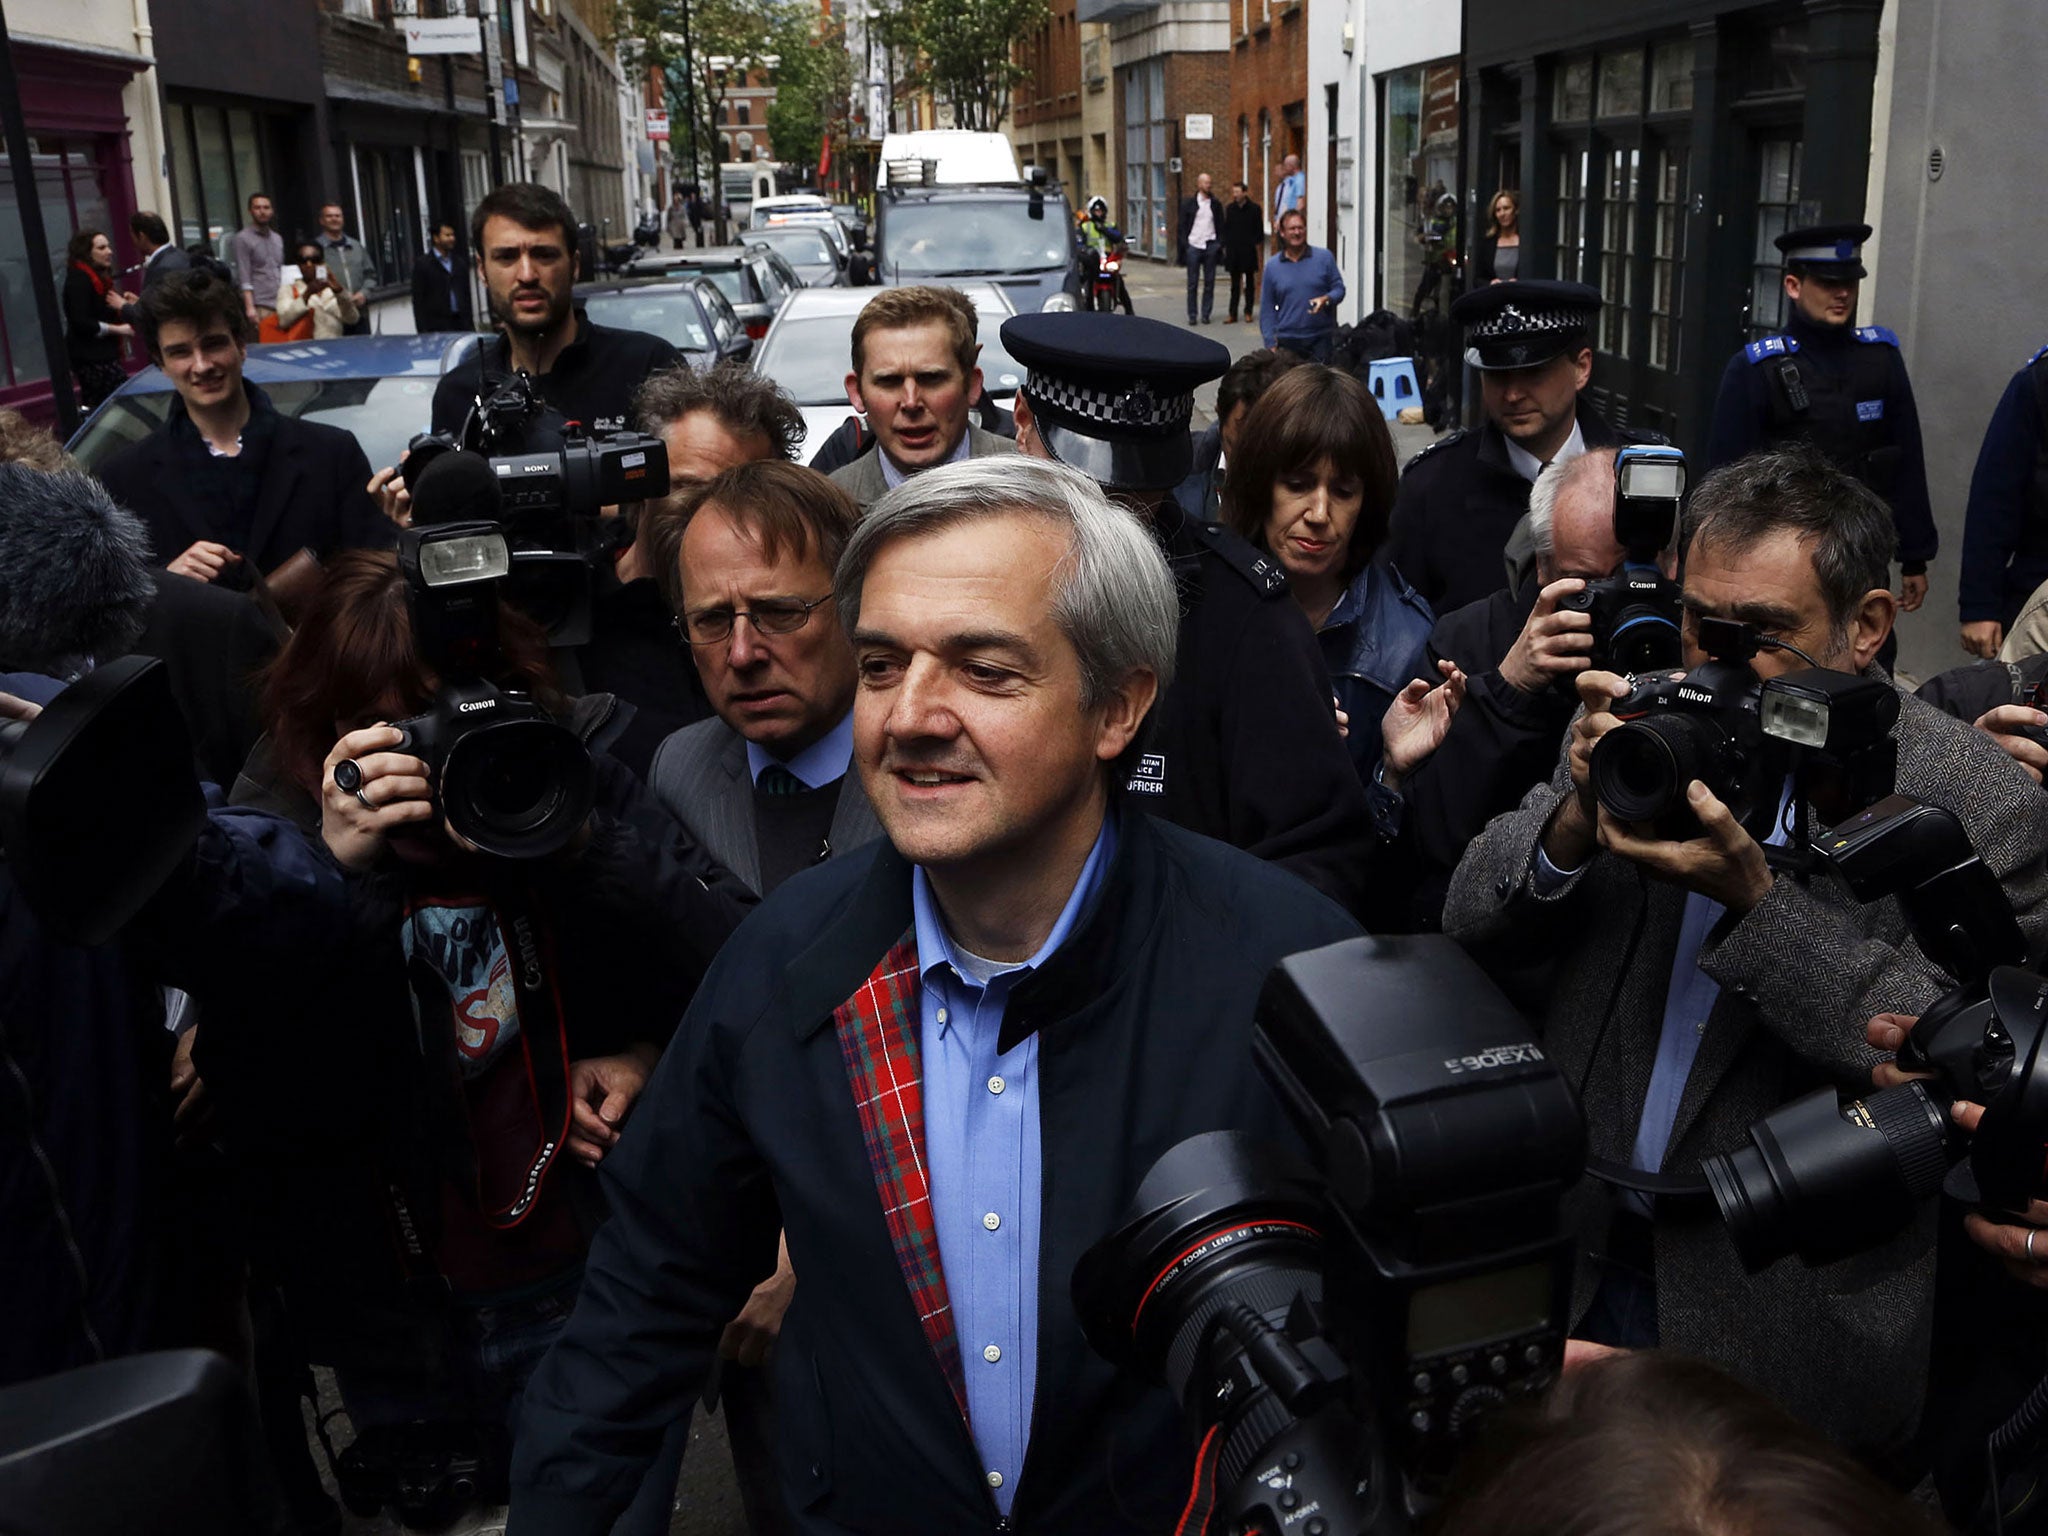 Chris Huhne speaks to the media as he arrives home after being released from prison on May 13, 2013 in Gloucester, England.